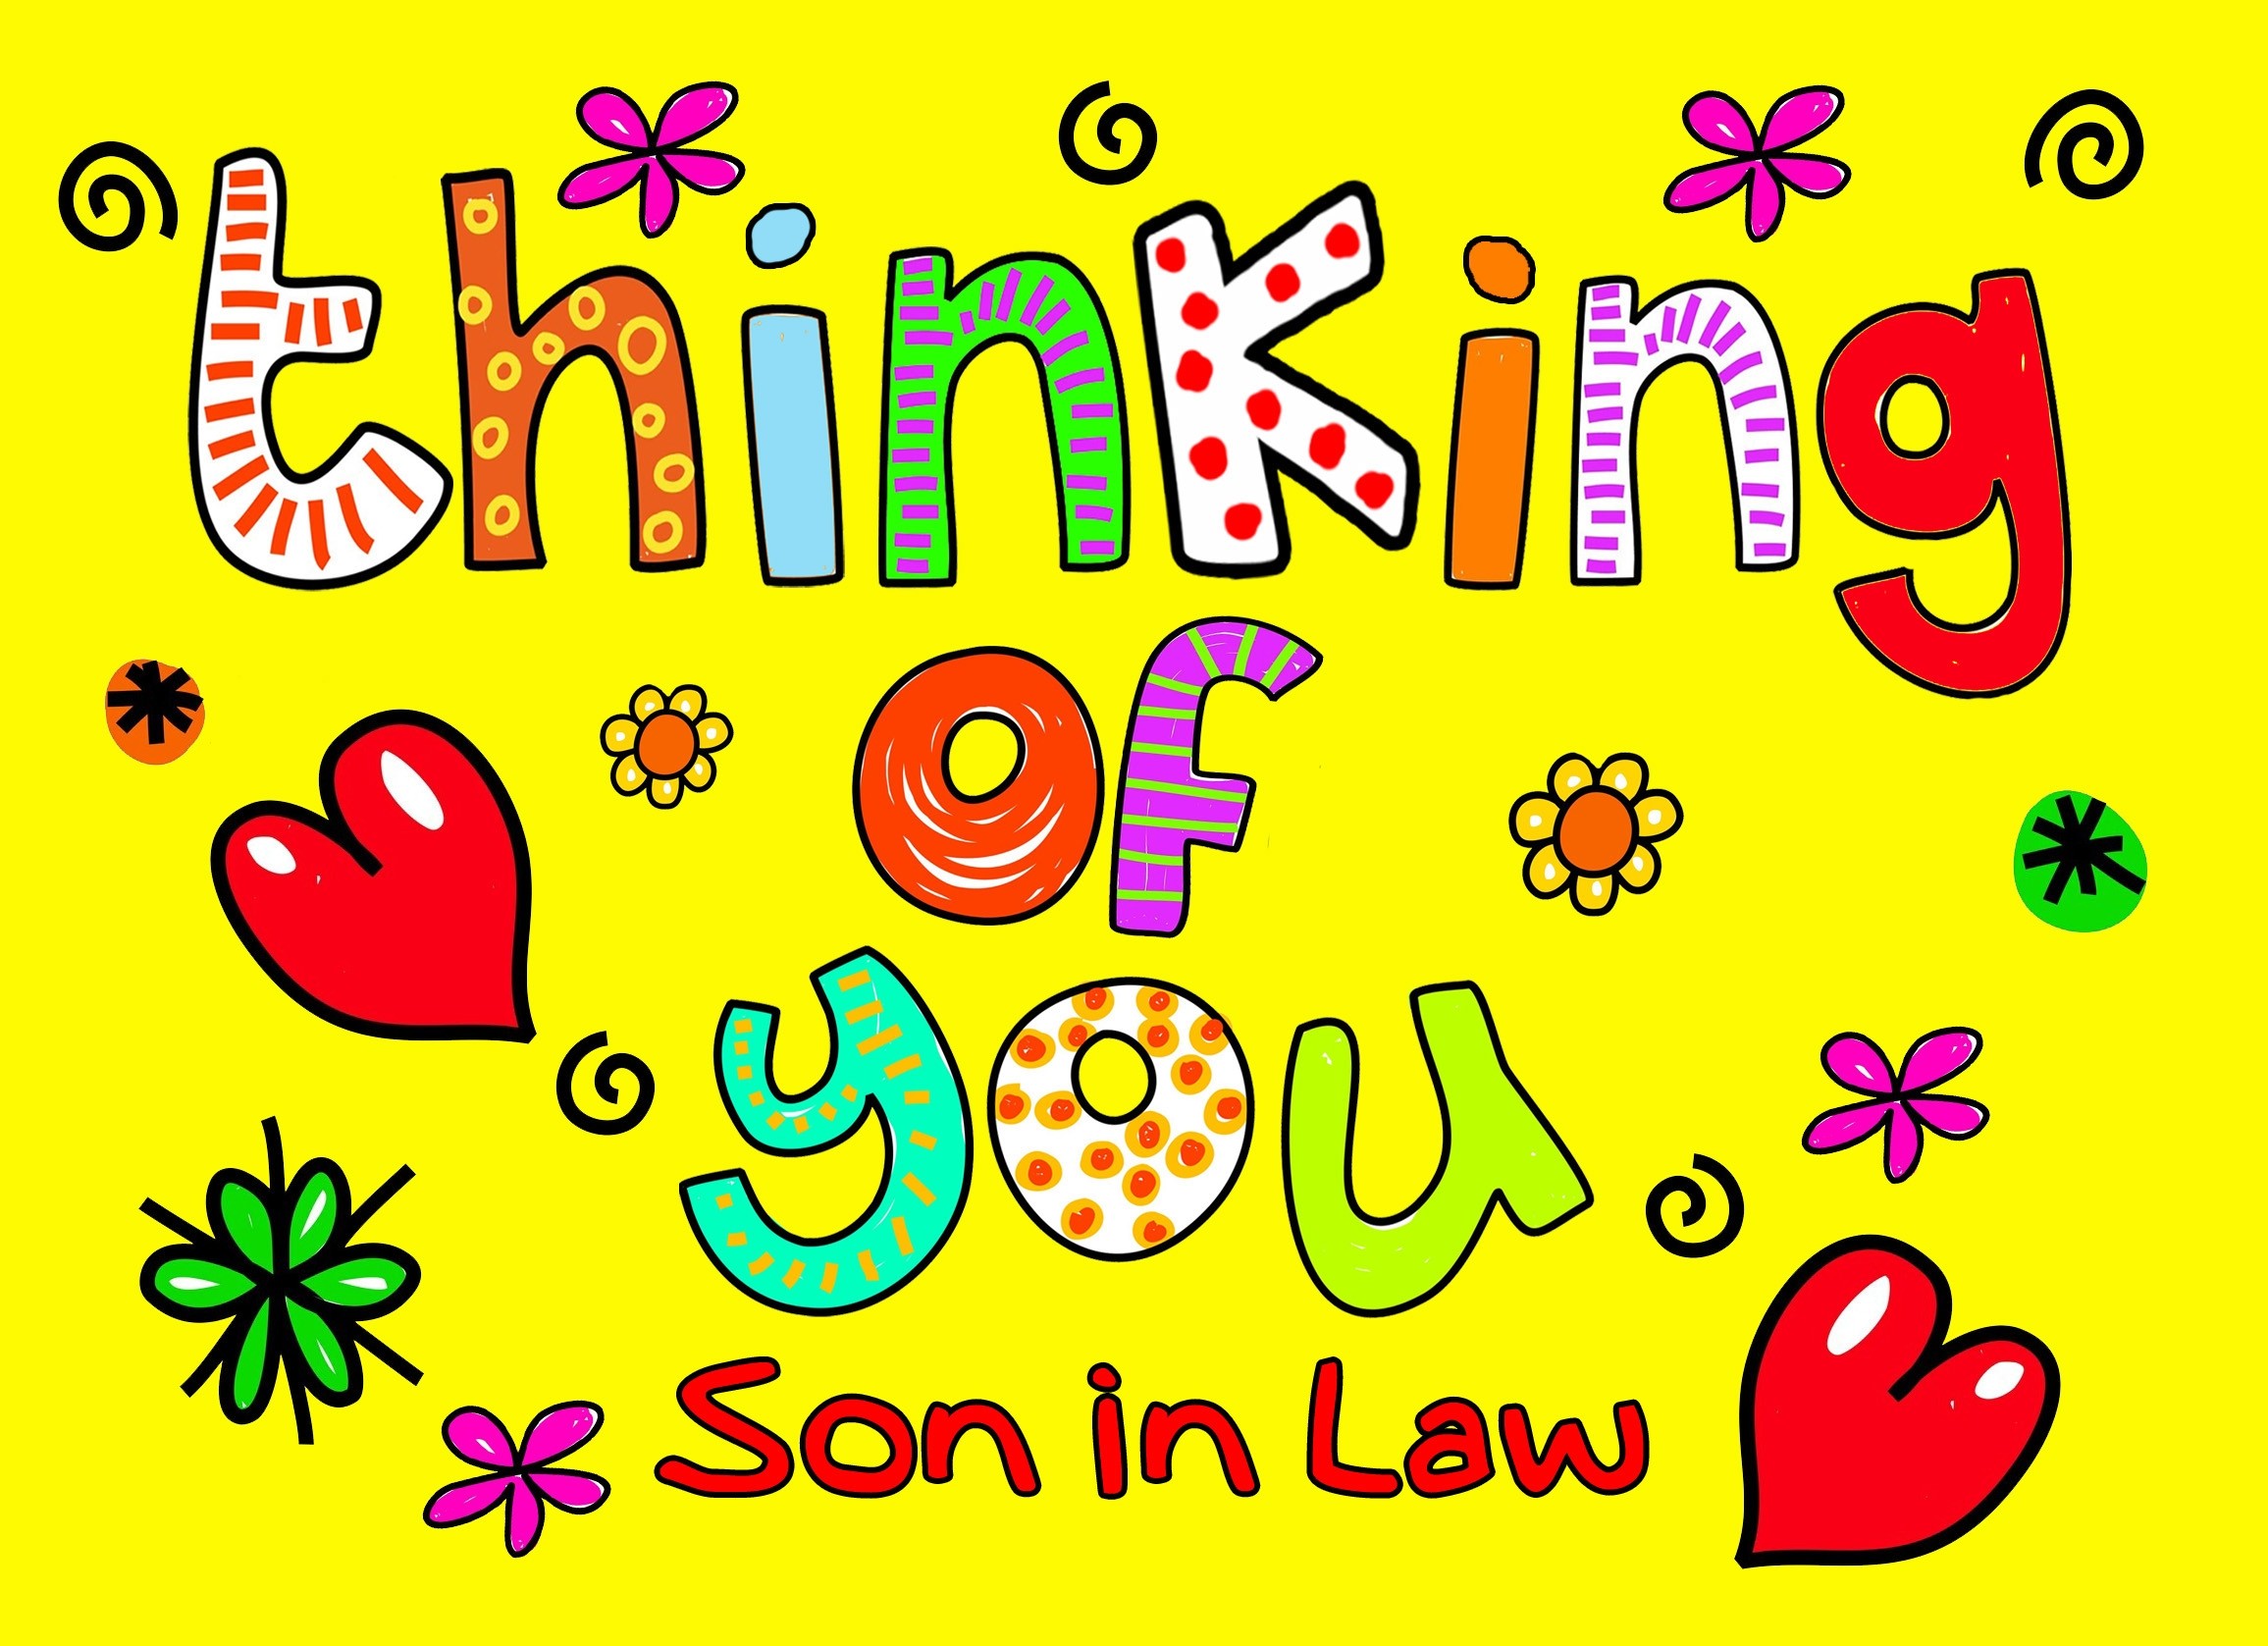 Thinking of You 'Son in Law' Greeting Card